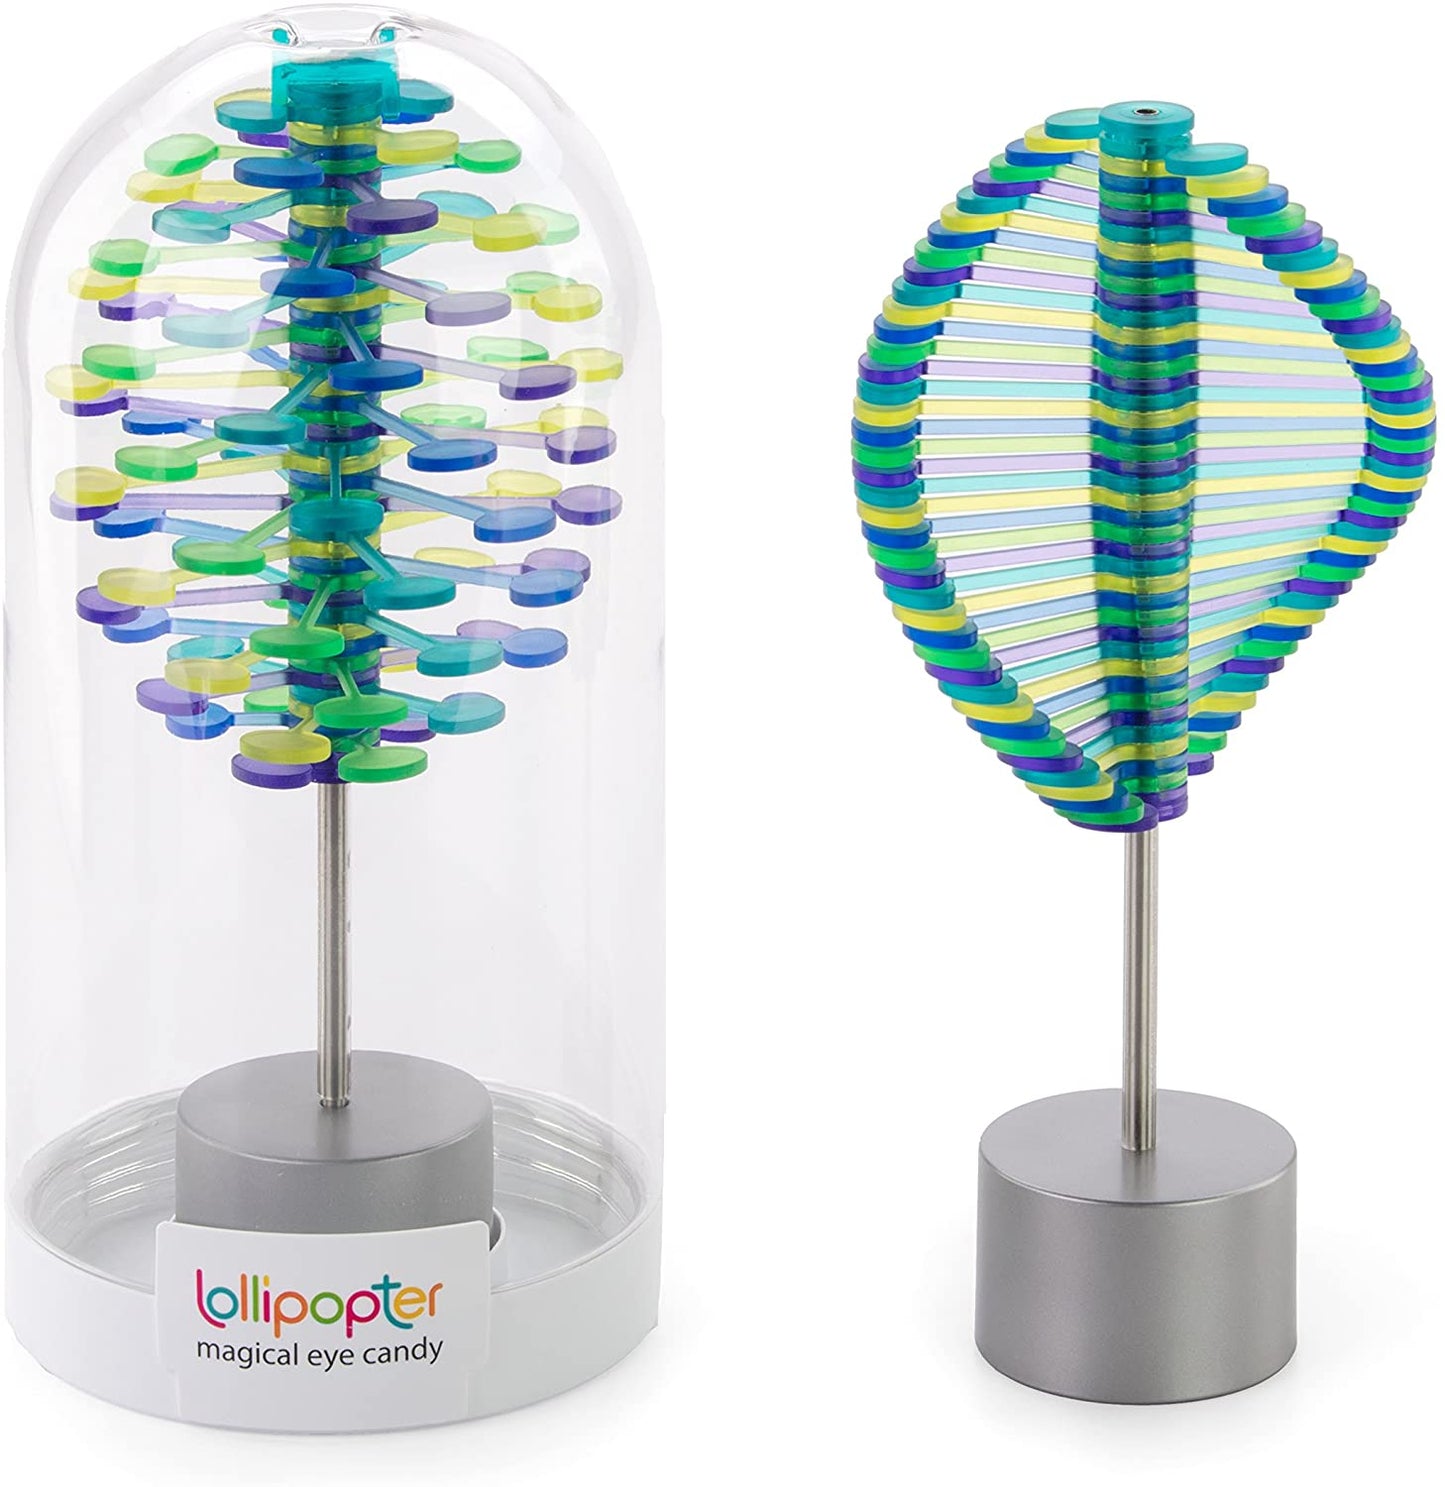 Flat lollipop shaped pieces form a tree that can be spread out or stacked